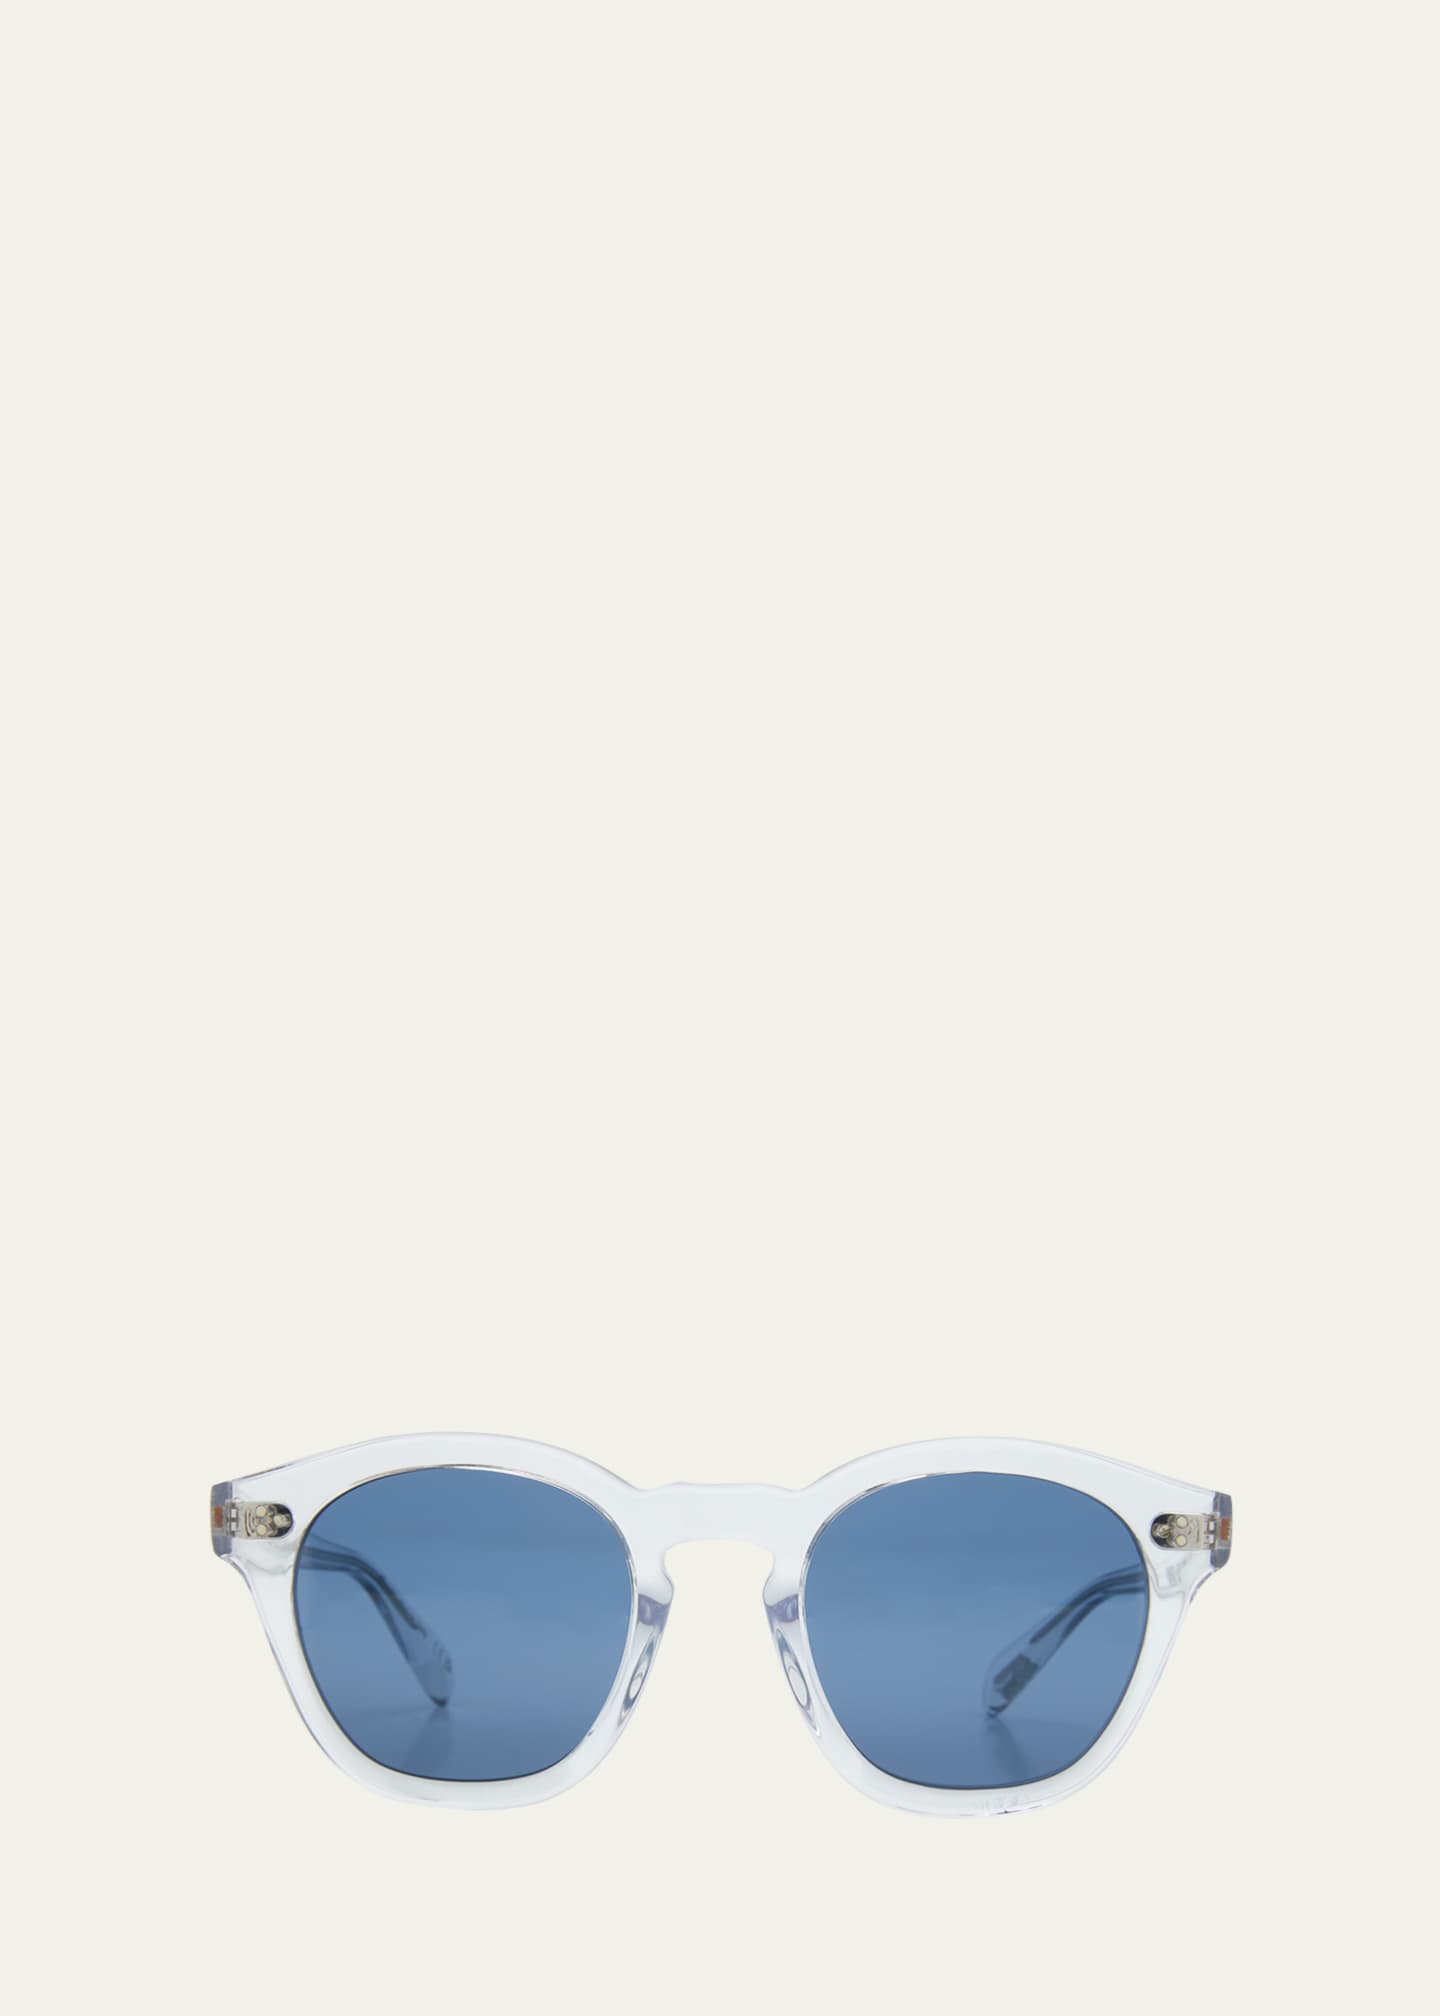 Oliver Peoples Clear Round Acetate Sunglasses - Bergdorf Goodman